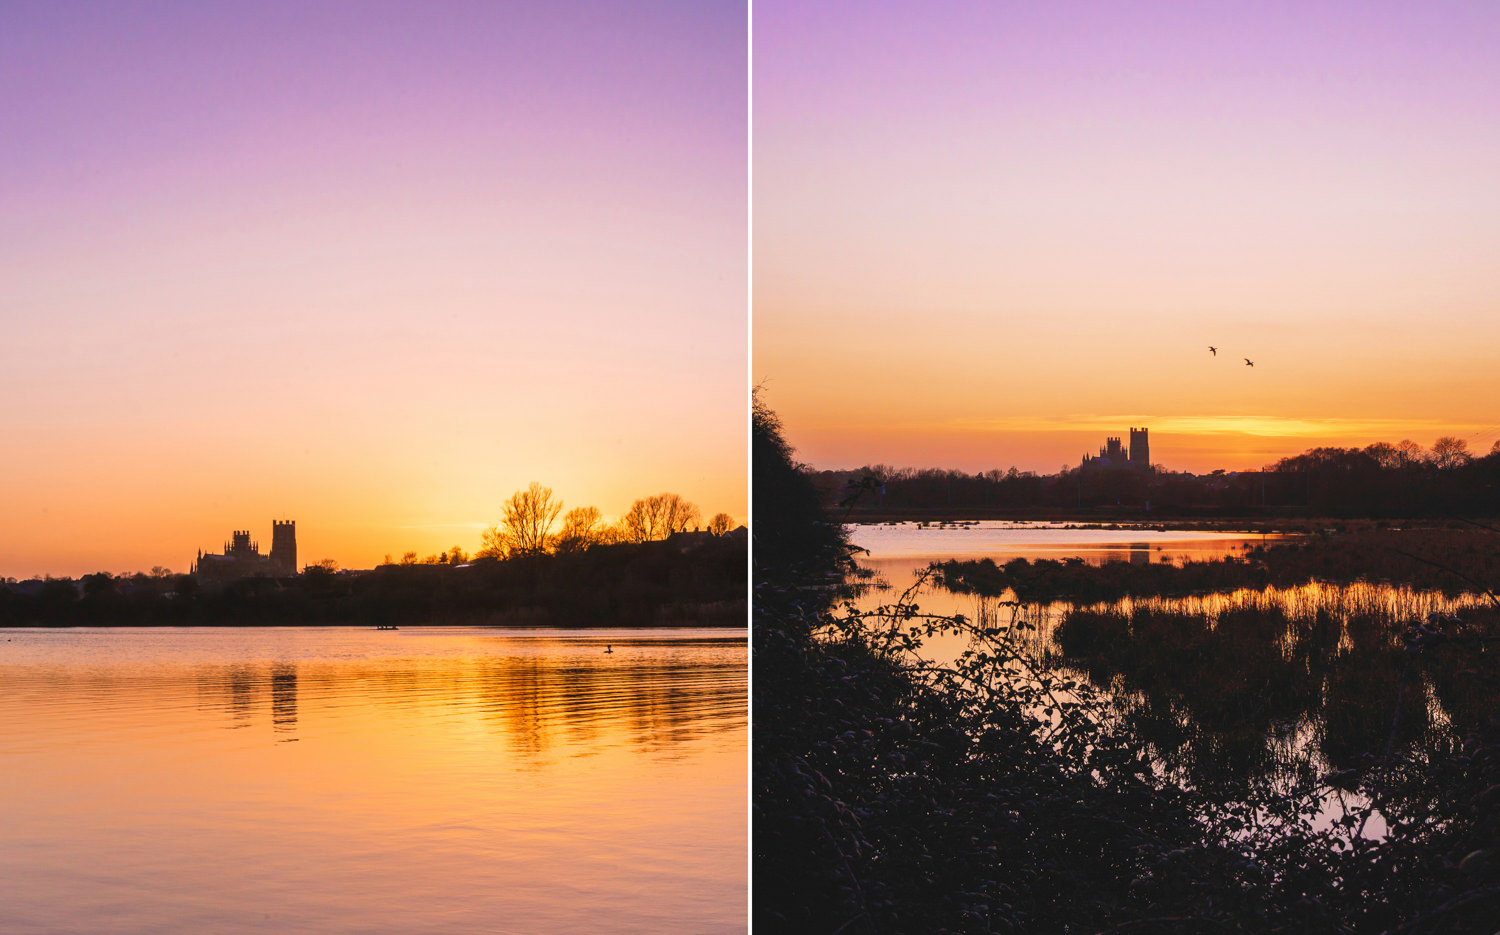 Sunset skies and ely cathedral in silouette